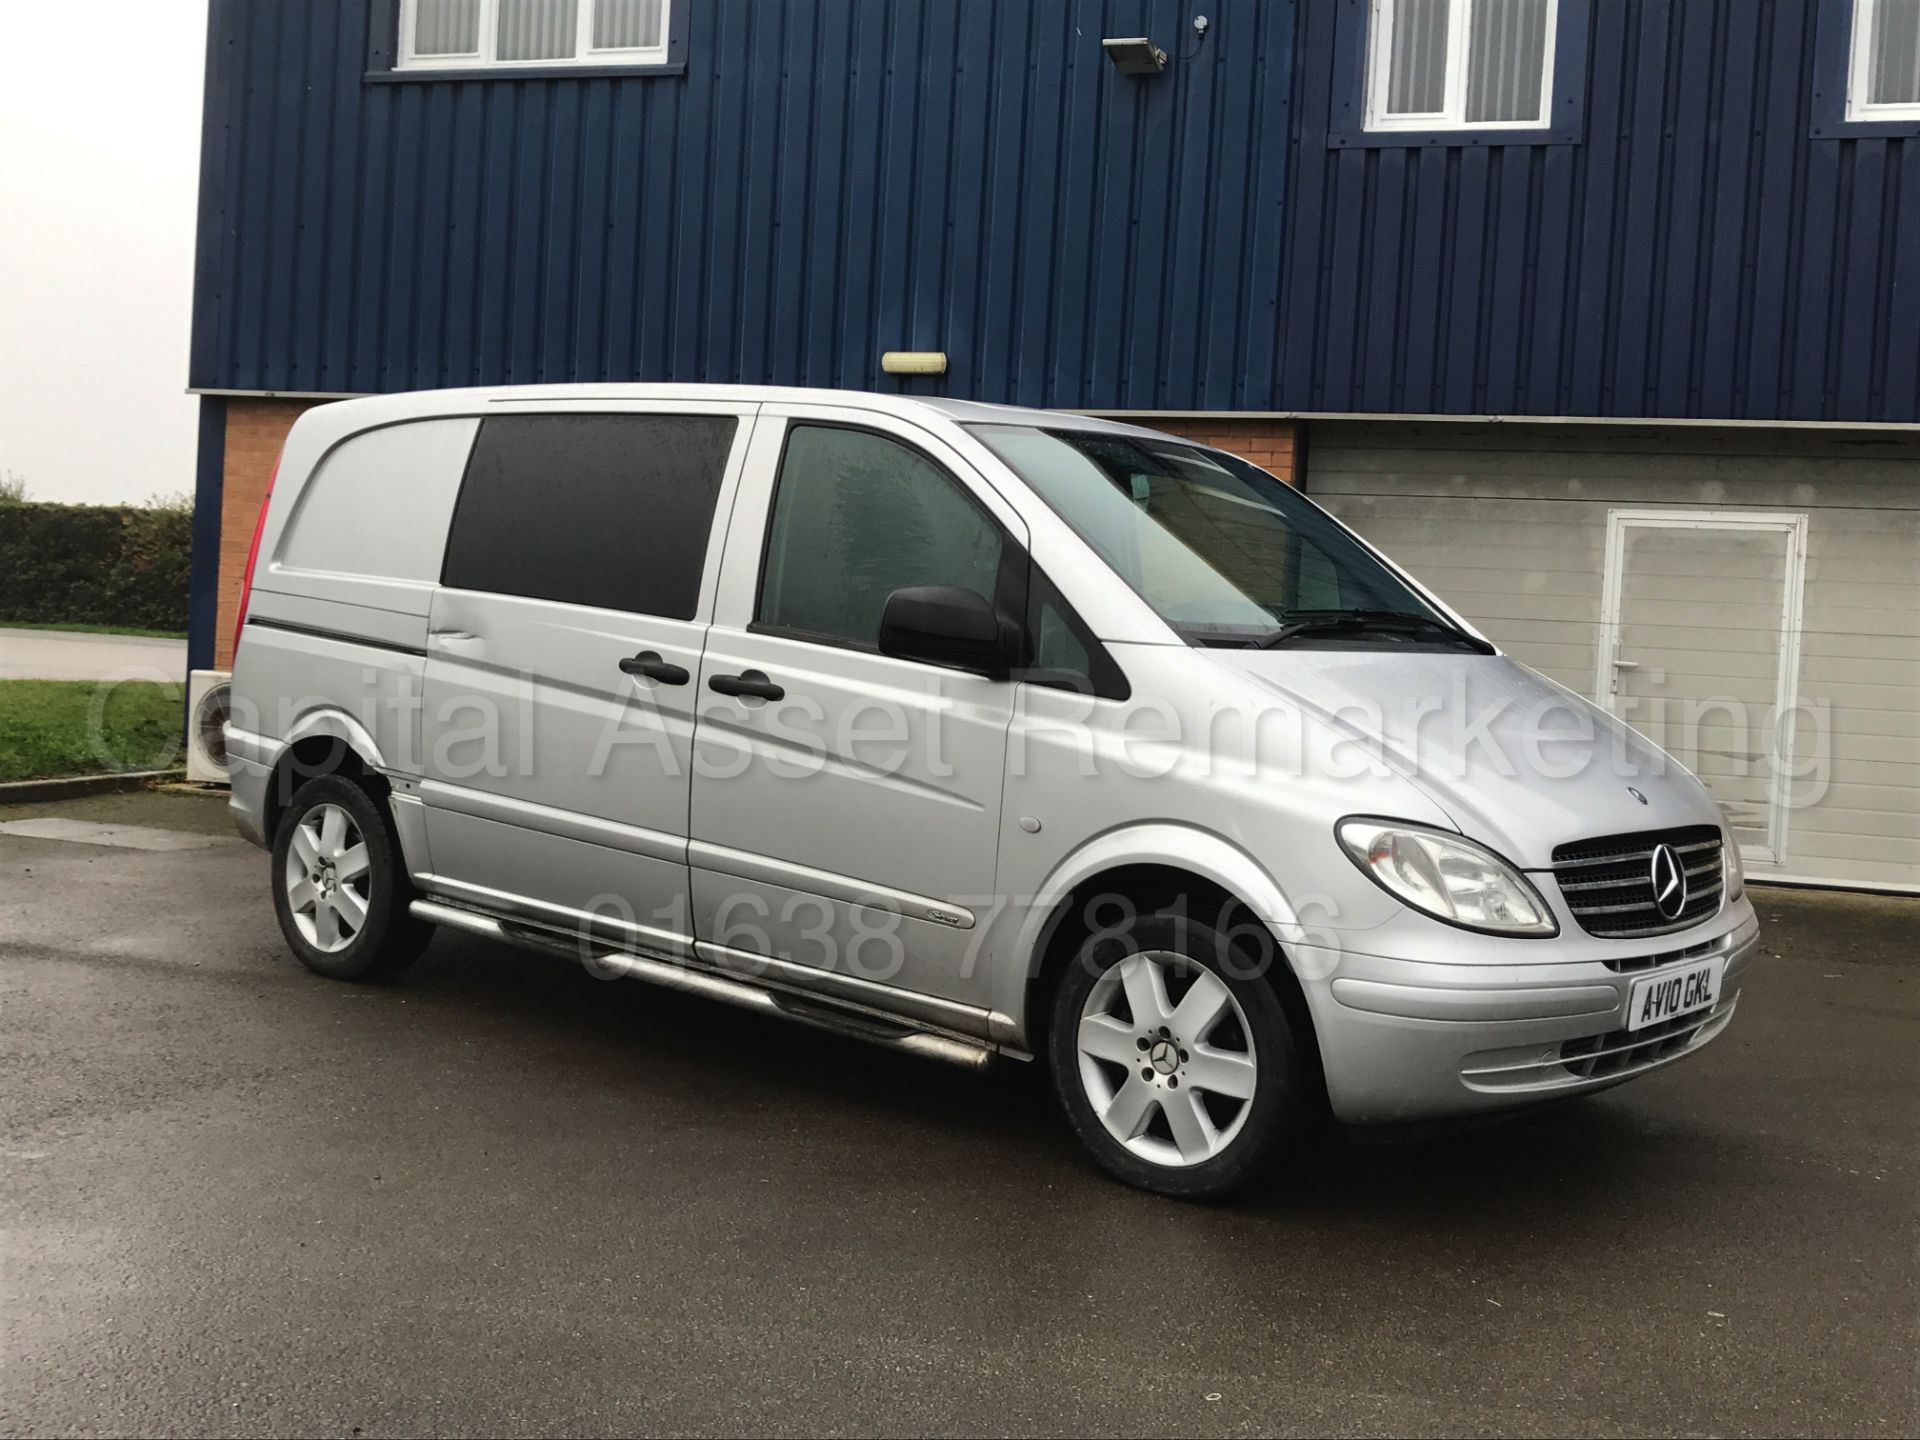 MERCEDES VITO *SPORT* '5 SEATER DUELINER' (2010 - 10 REG) '2.1 CDI - 150 BHP - 6 SPEED' **AIR CON** - Image 8 of 35